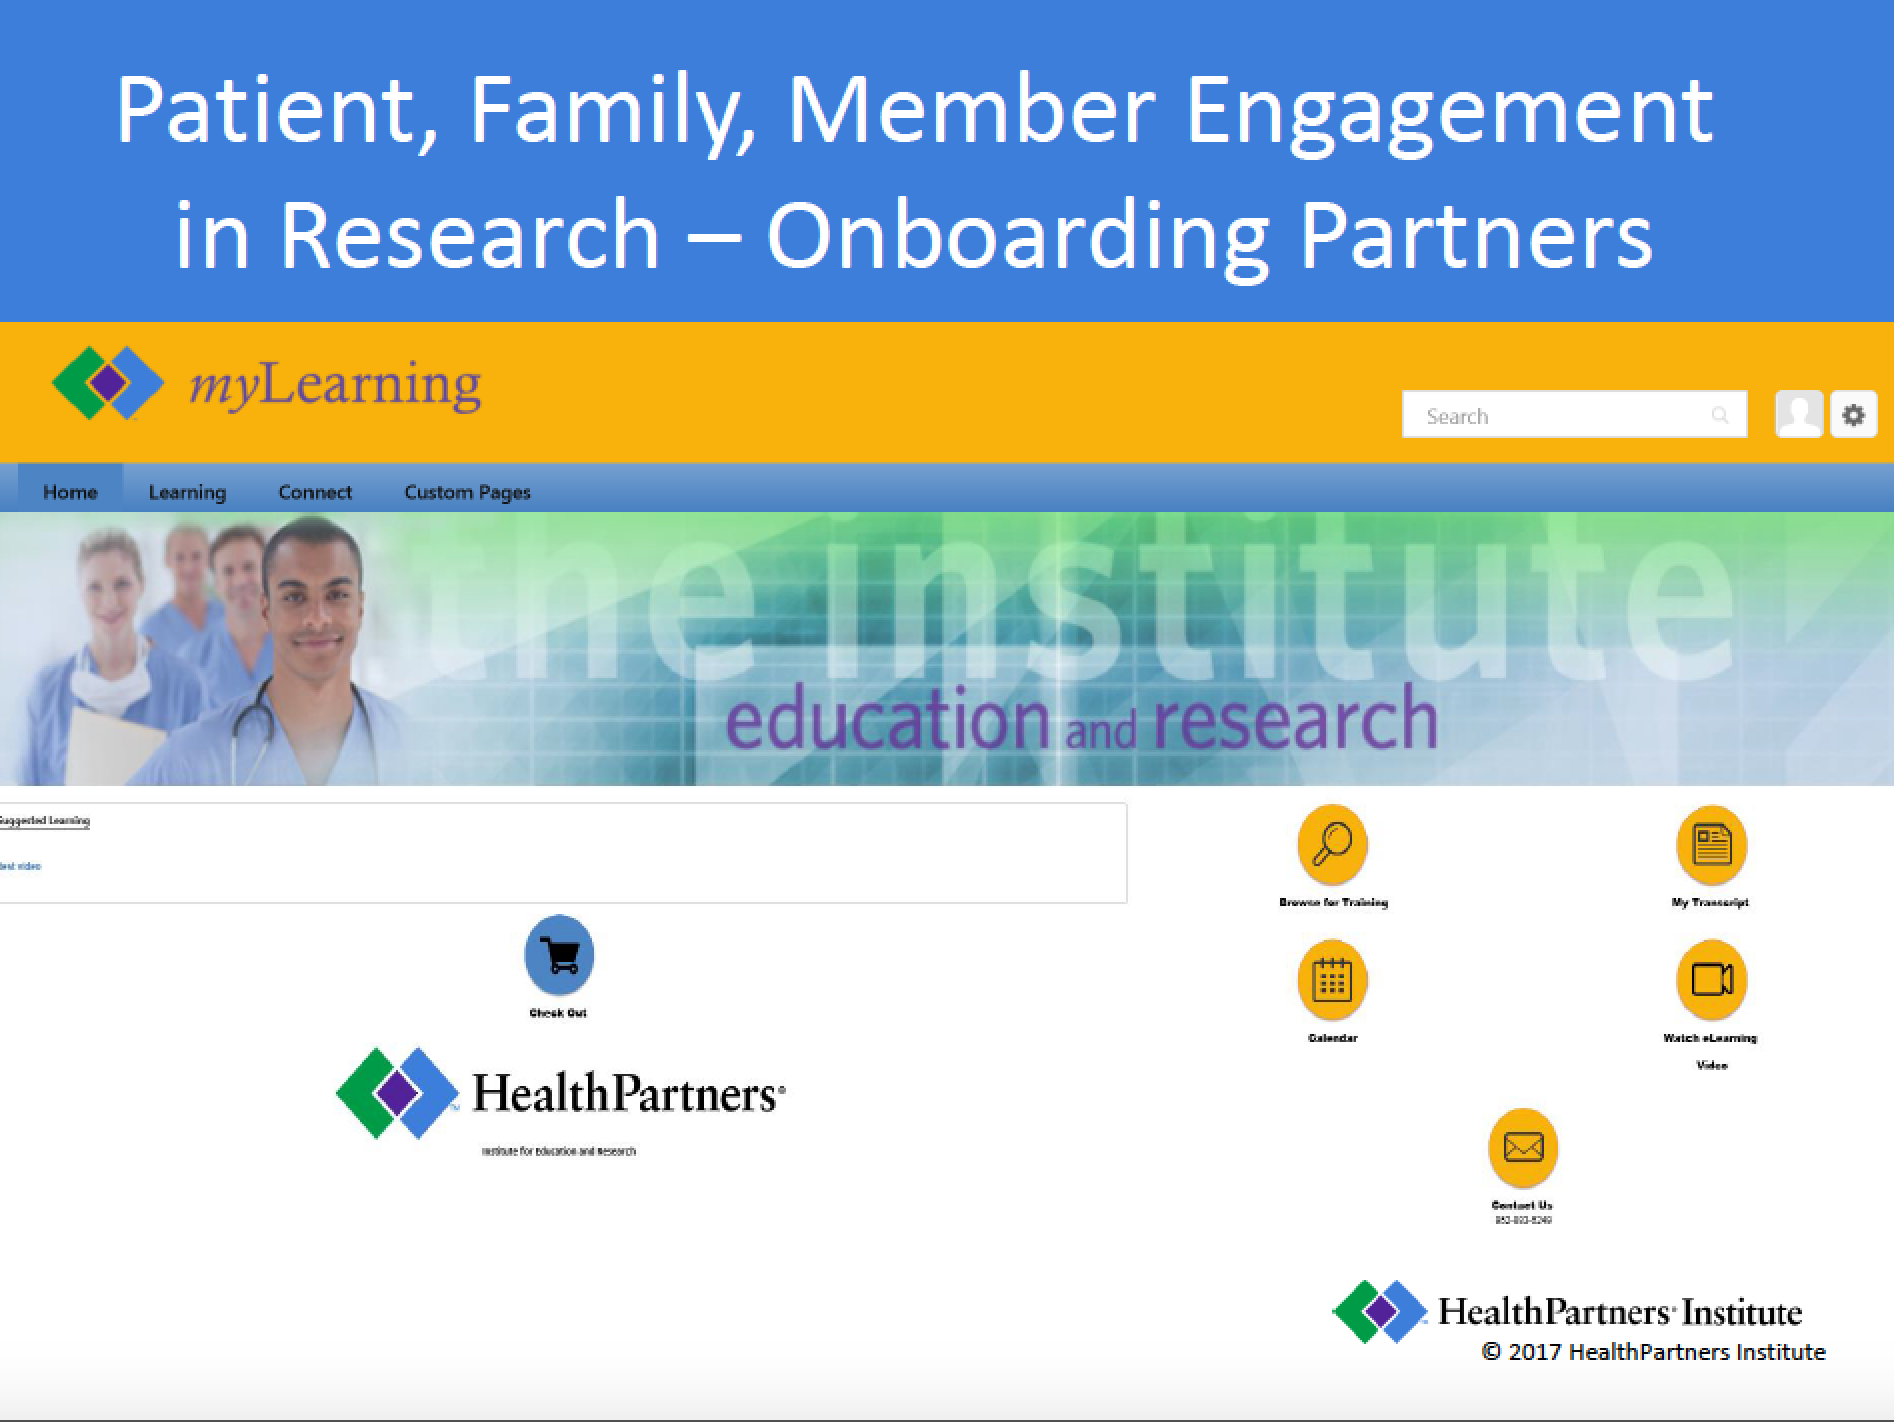 Patient, Family, Member Engagement in Research - Onboarding Partners